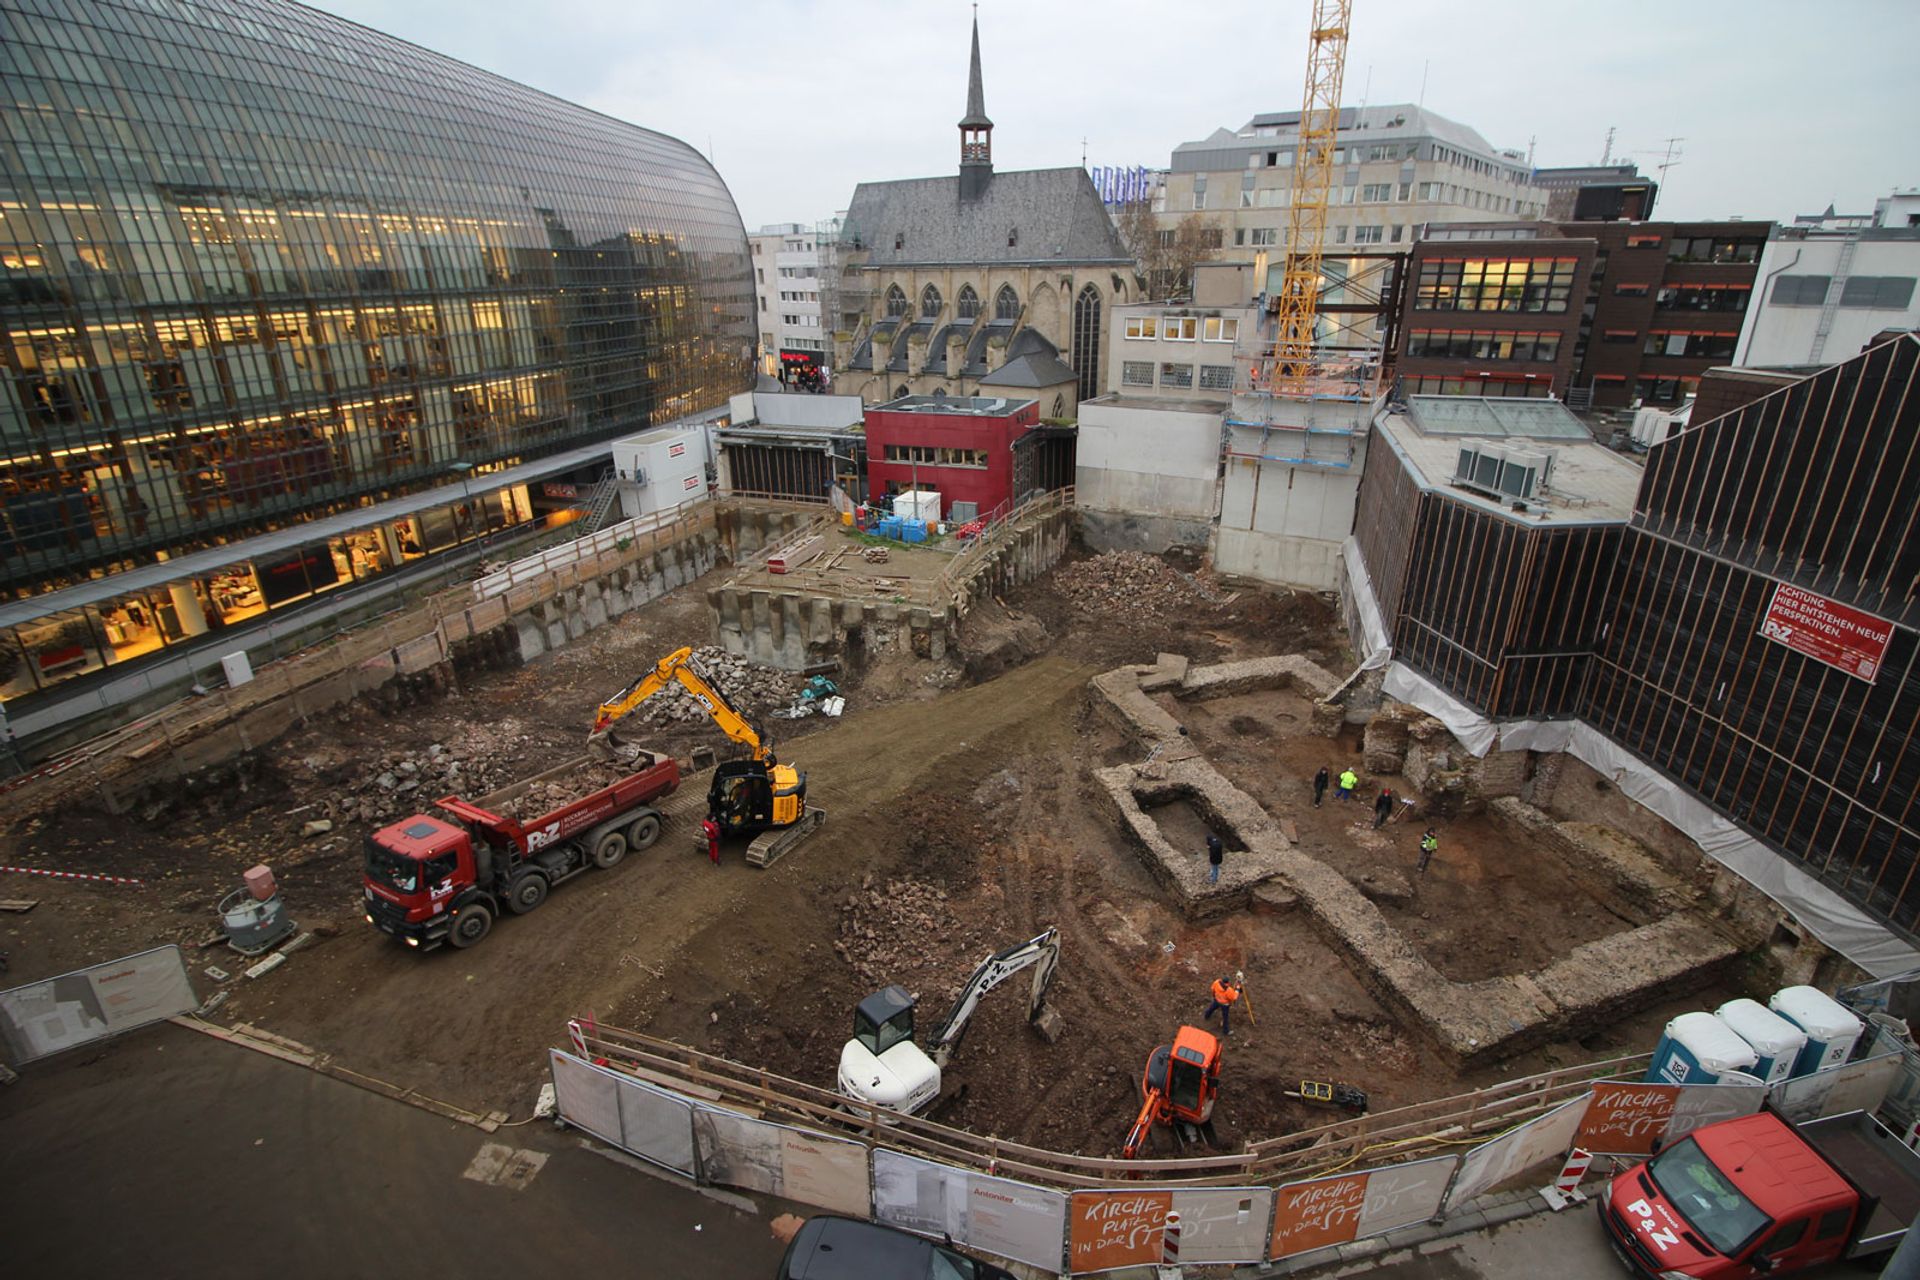 The foundations of a Roman building that is probably the oldest library in Germany have been uncovered in central Cologne © Römisch-Germanisches Museum der Stadt Köln